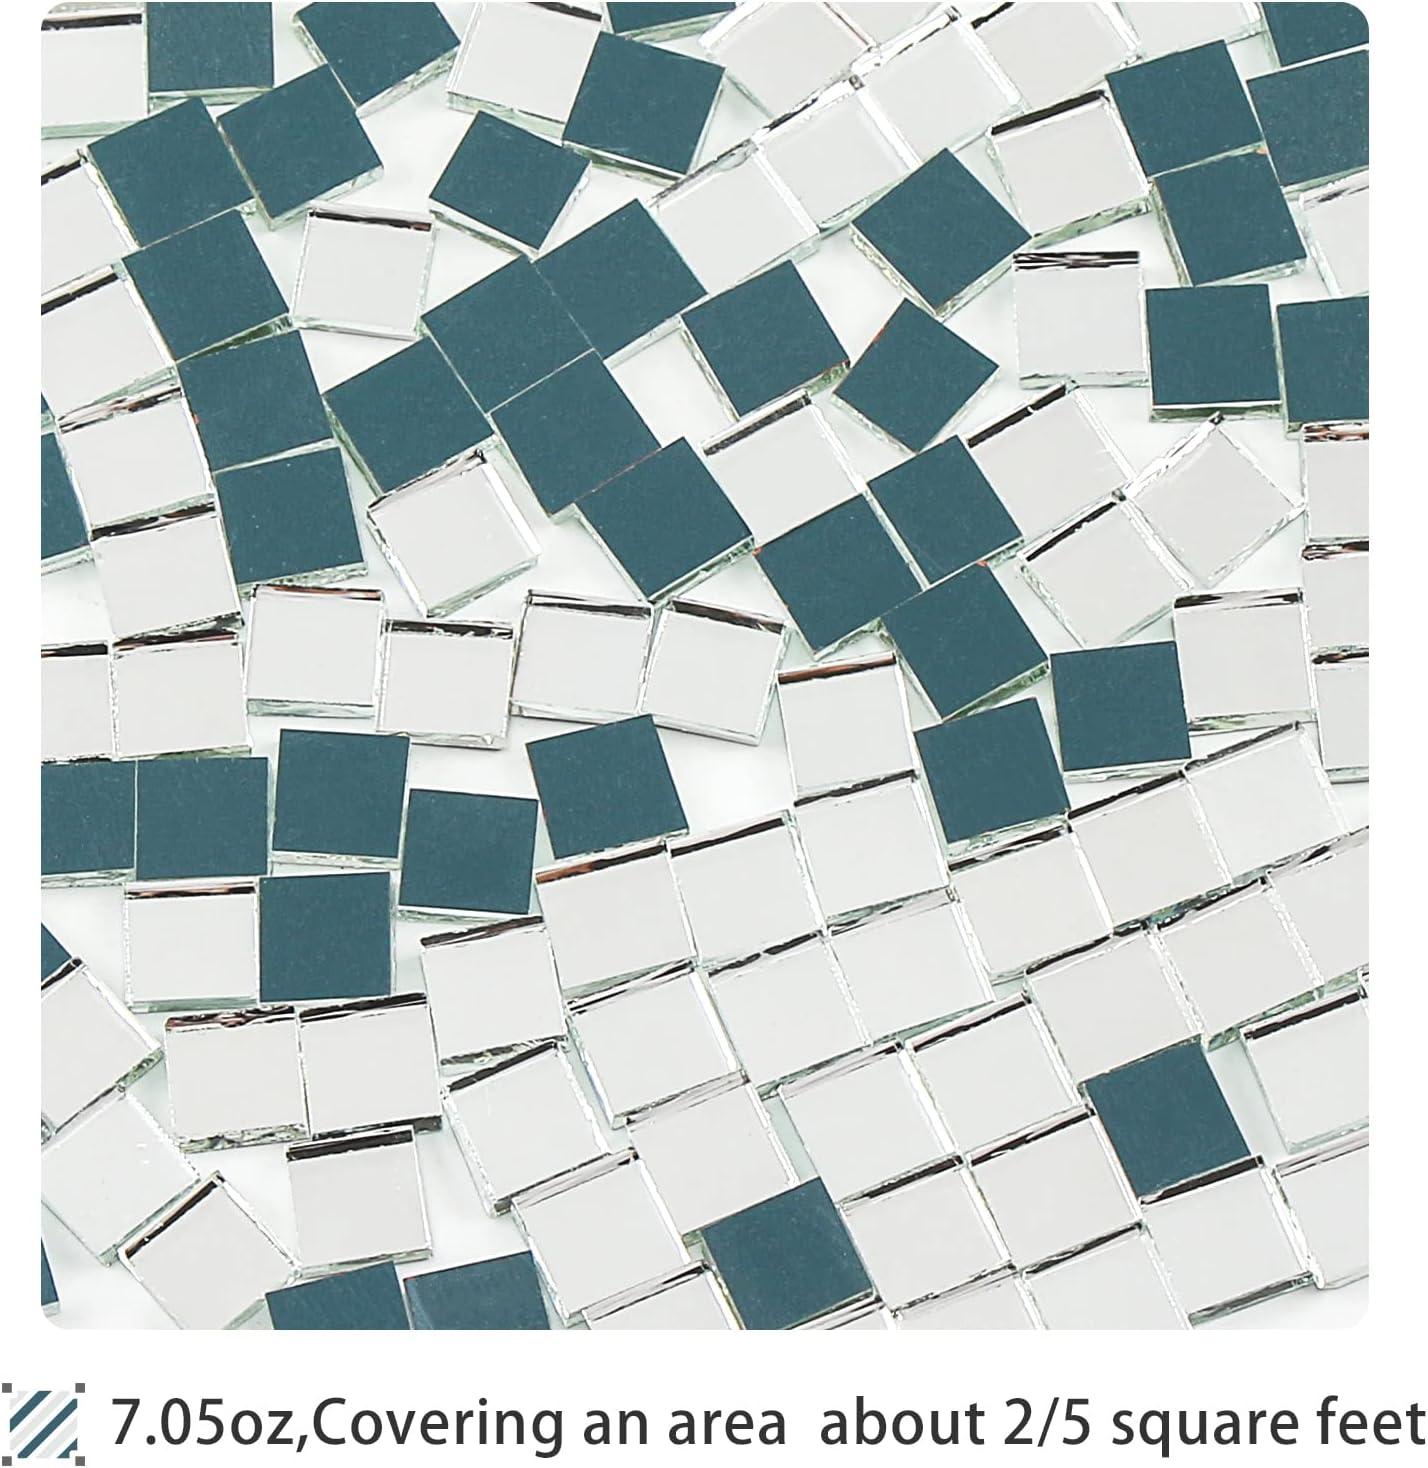 Youway Style Glass Mirror Mosaic Tiles,200g Square Small Mirror